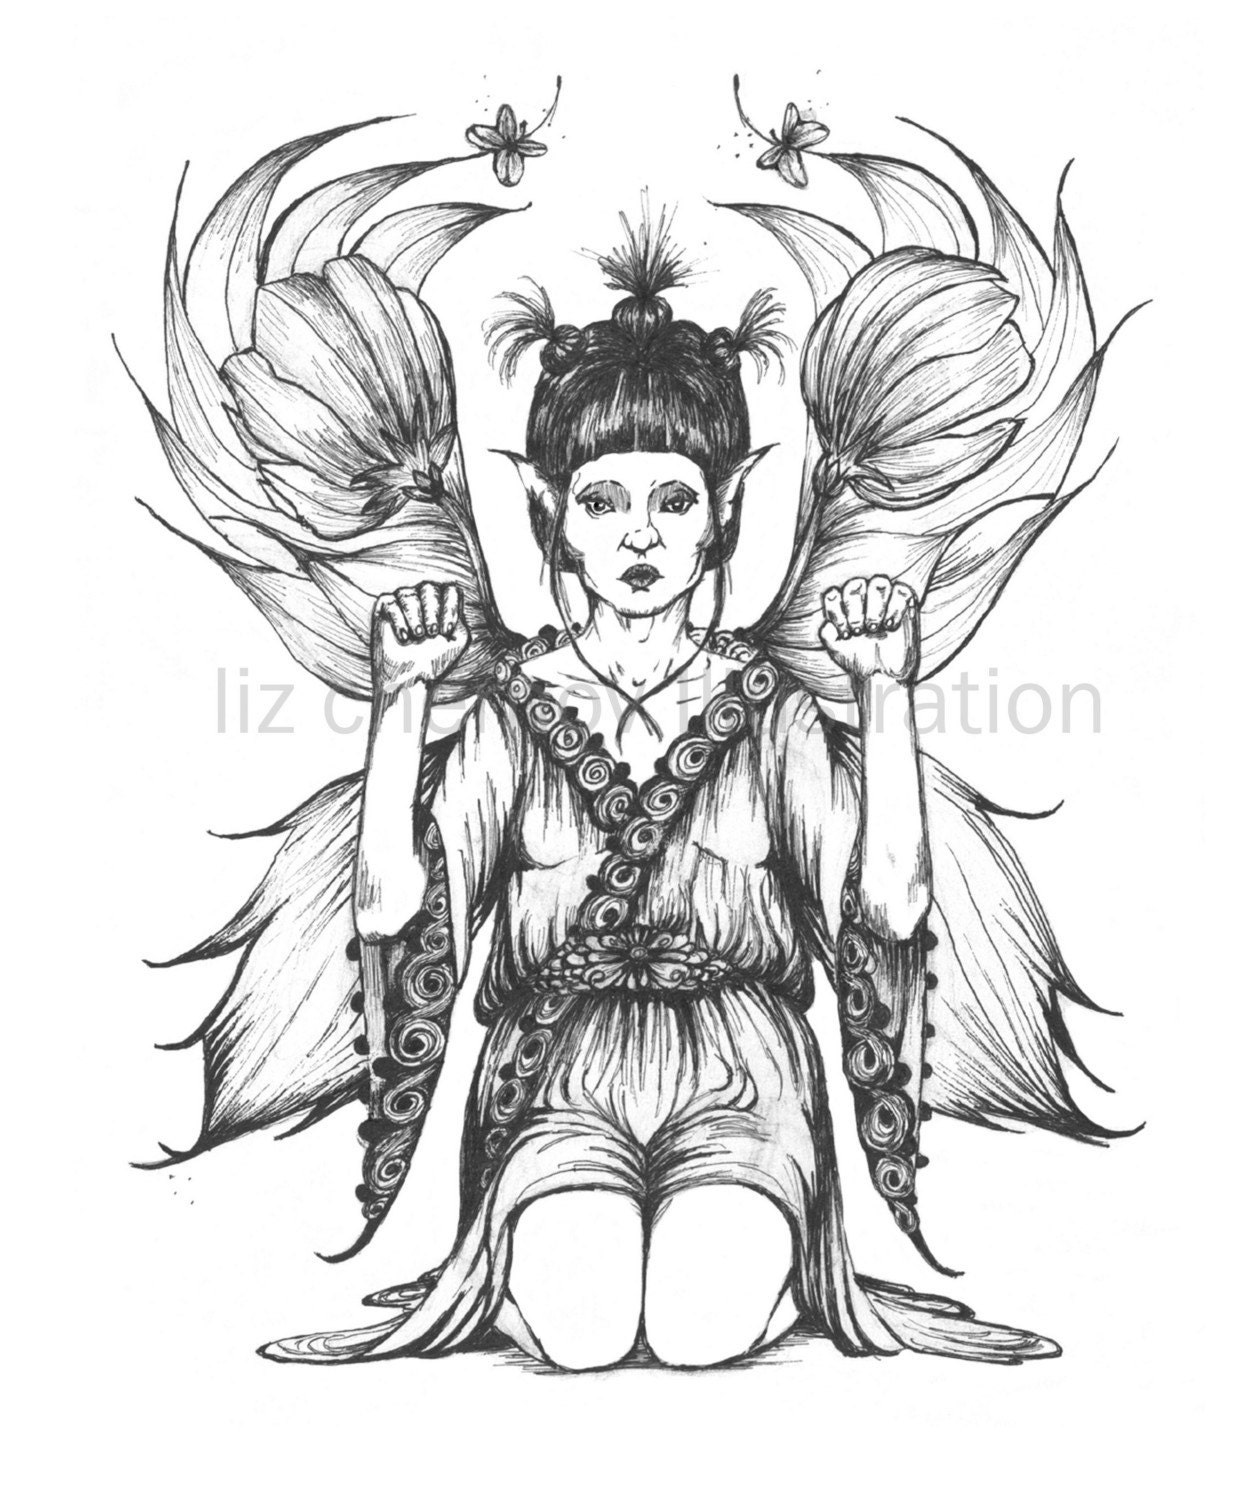 Liz Chernov sells amazing black and white illustrated captures of fairies in 